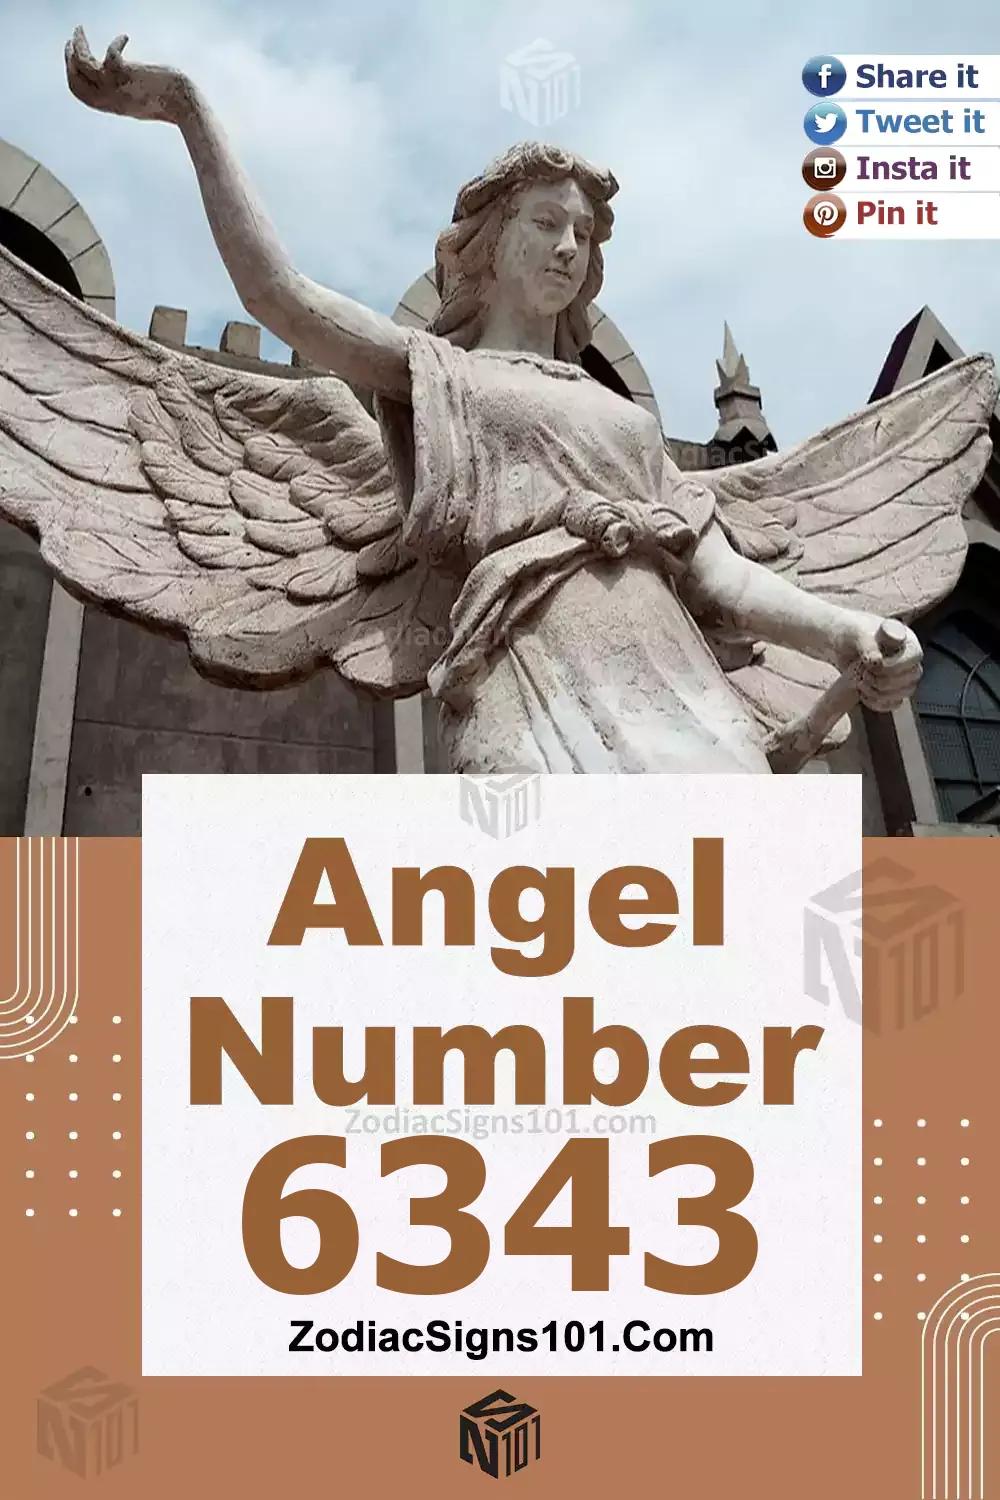 6343 Angel Number Meaning